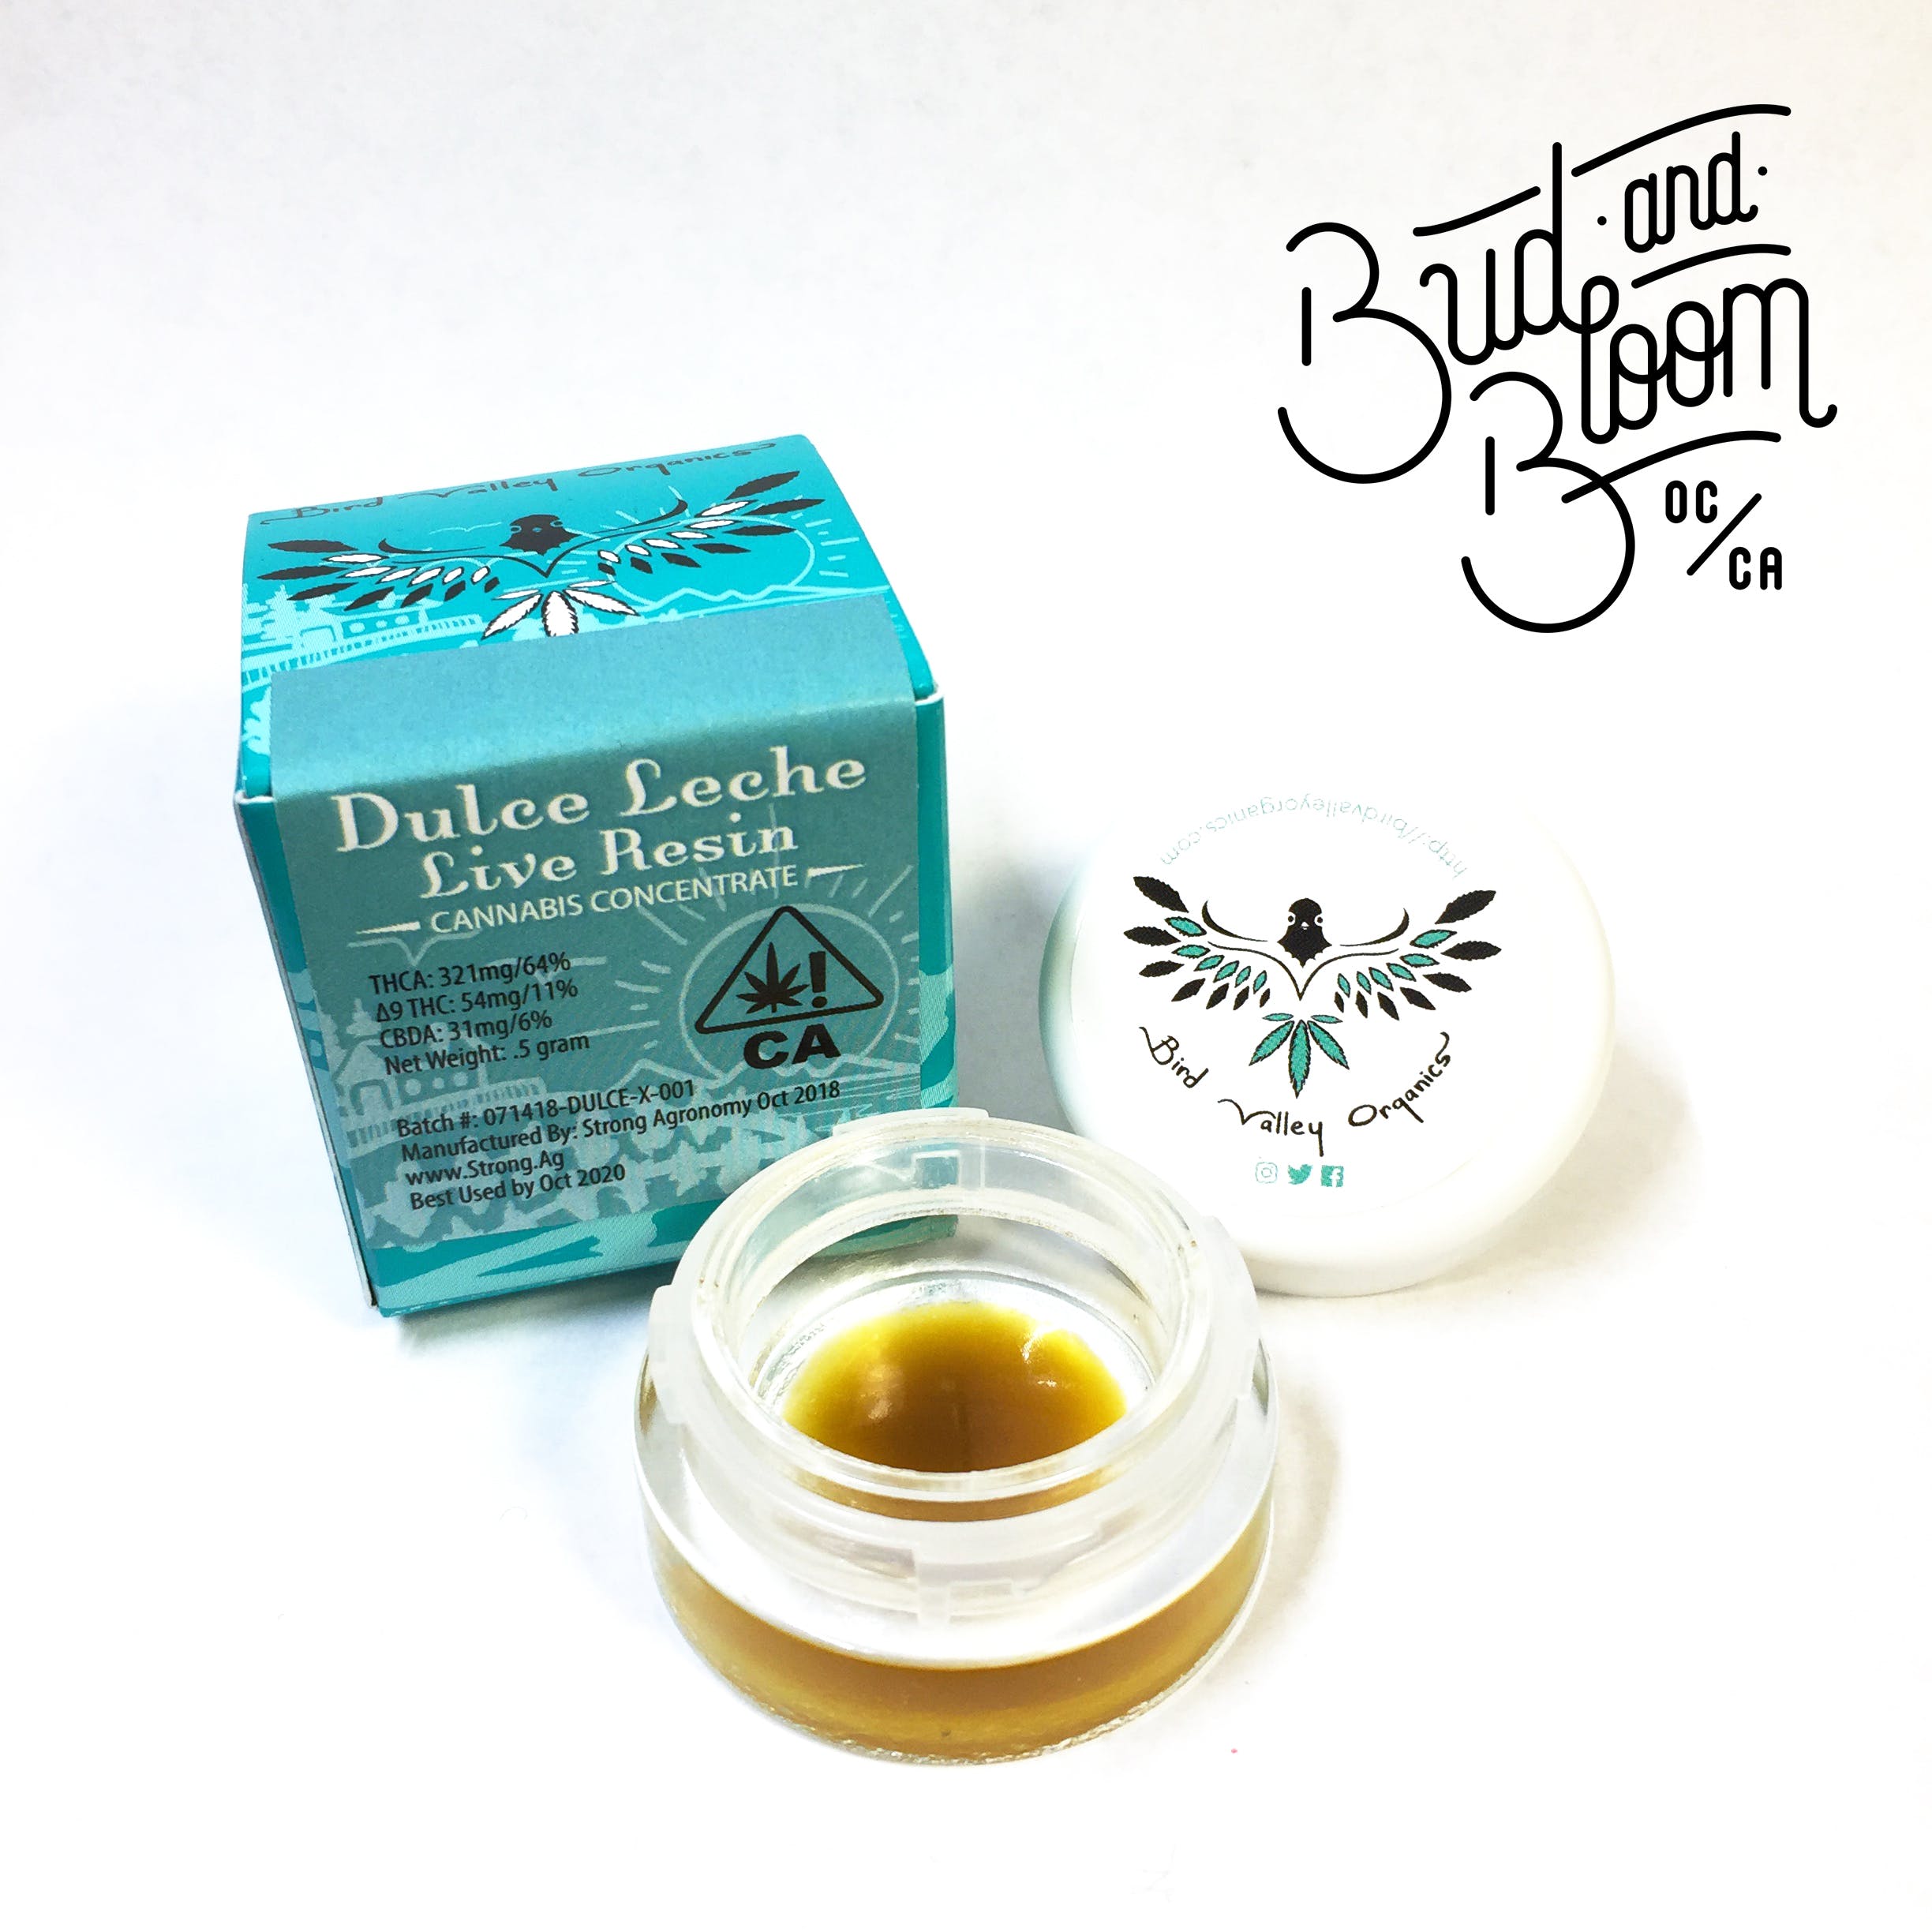 Dulce Leche Live Resin by Bird Valley